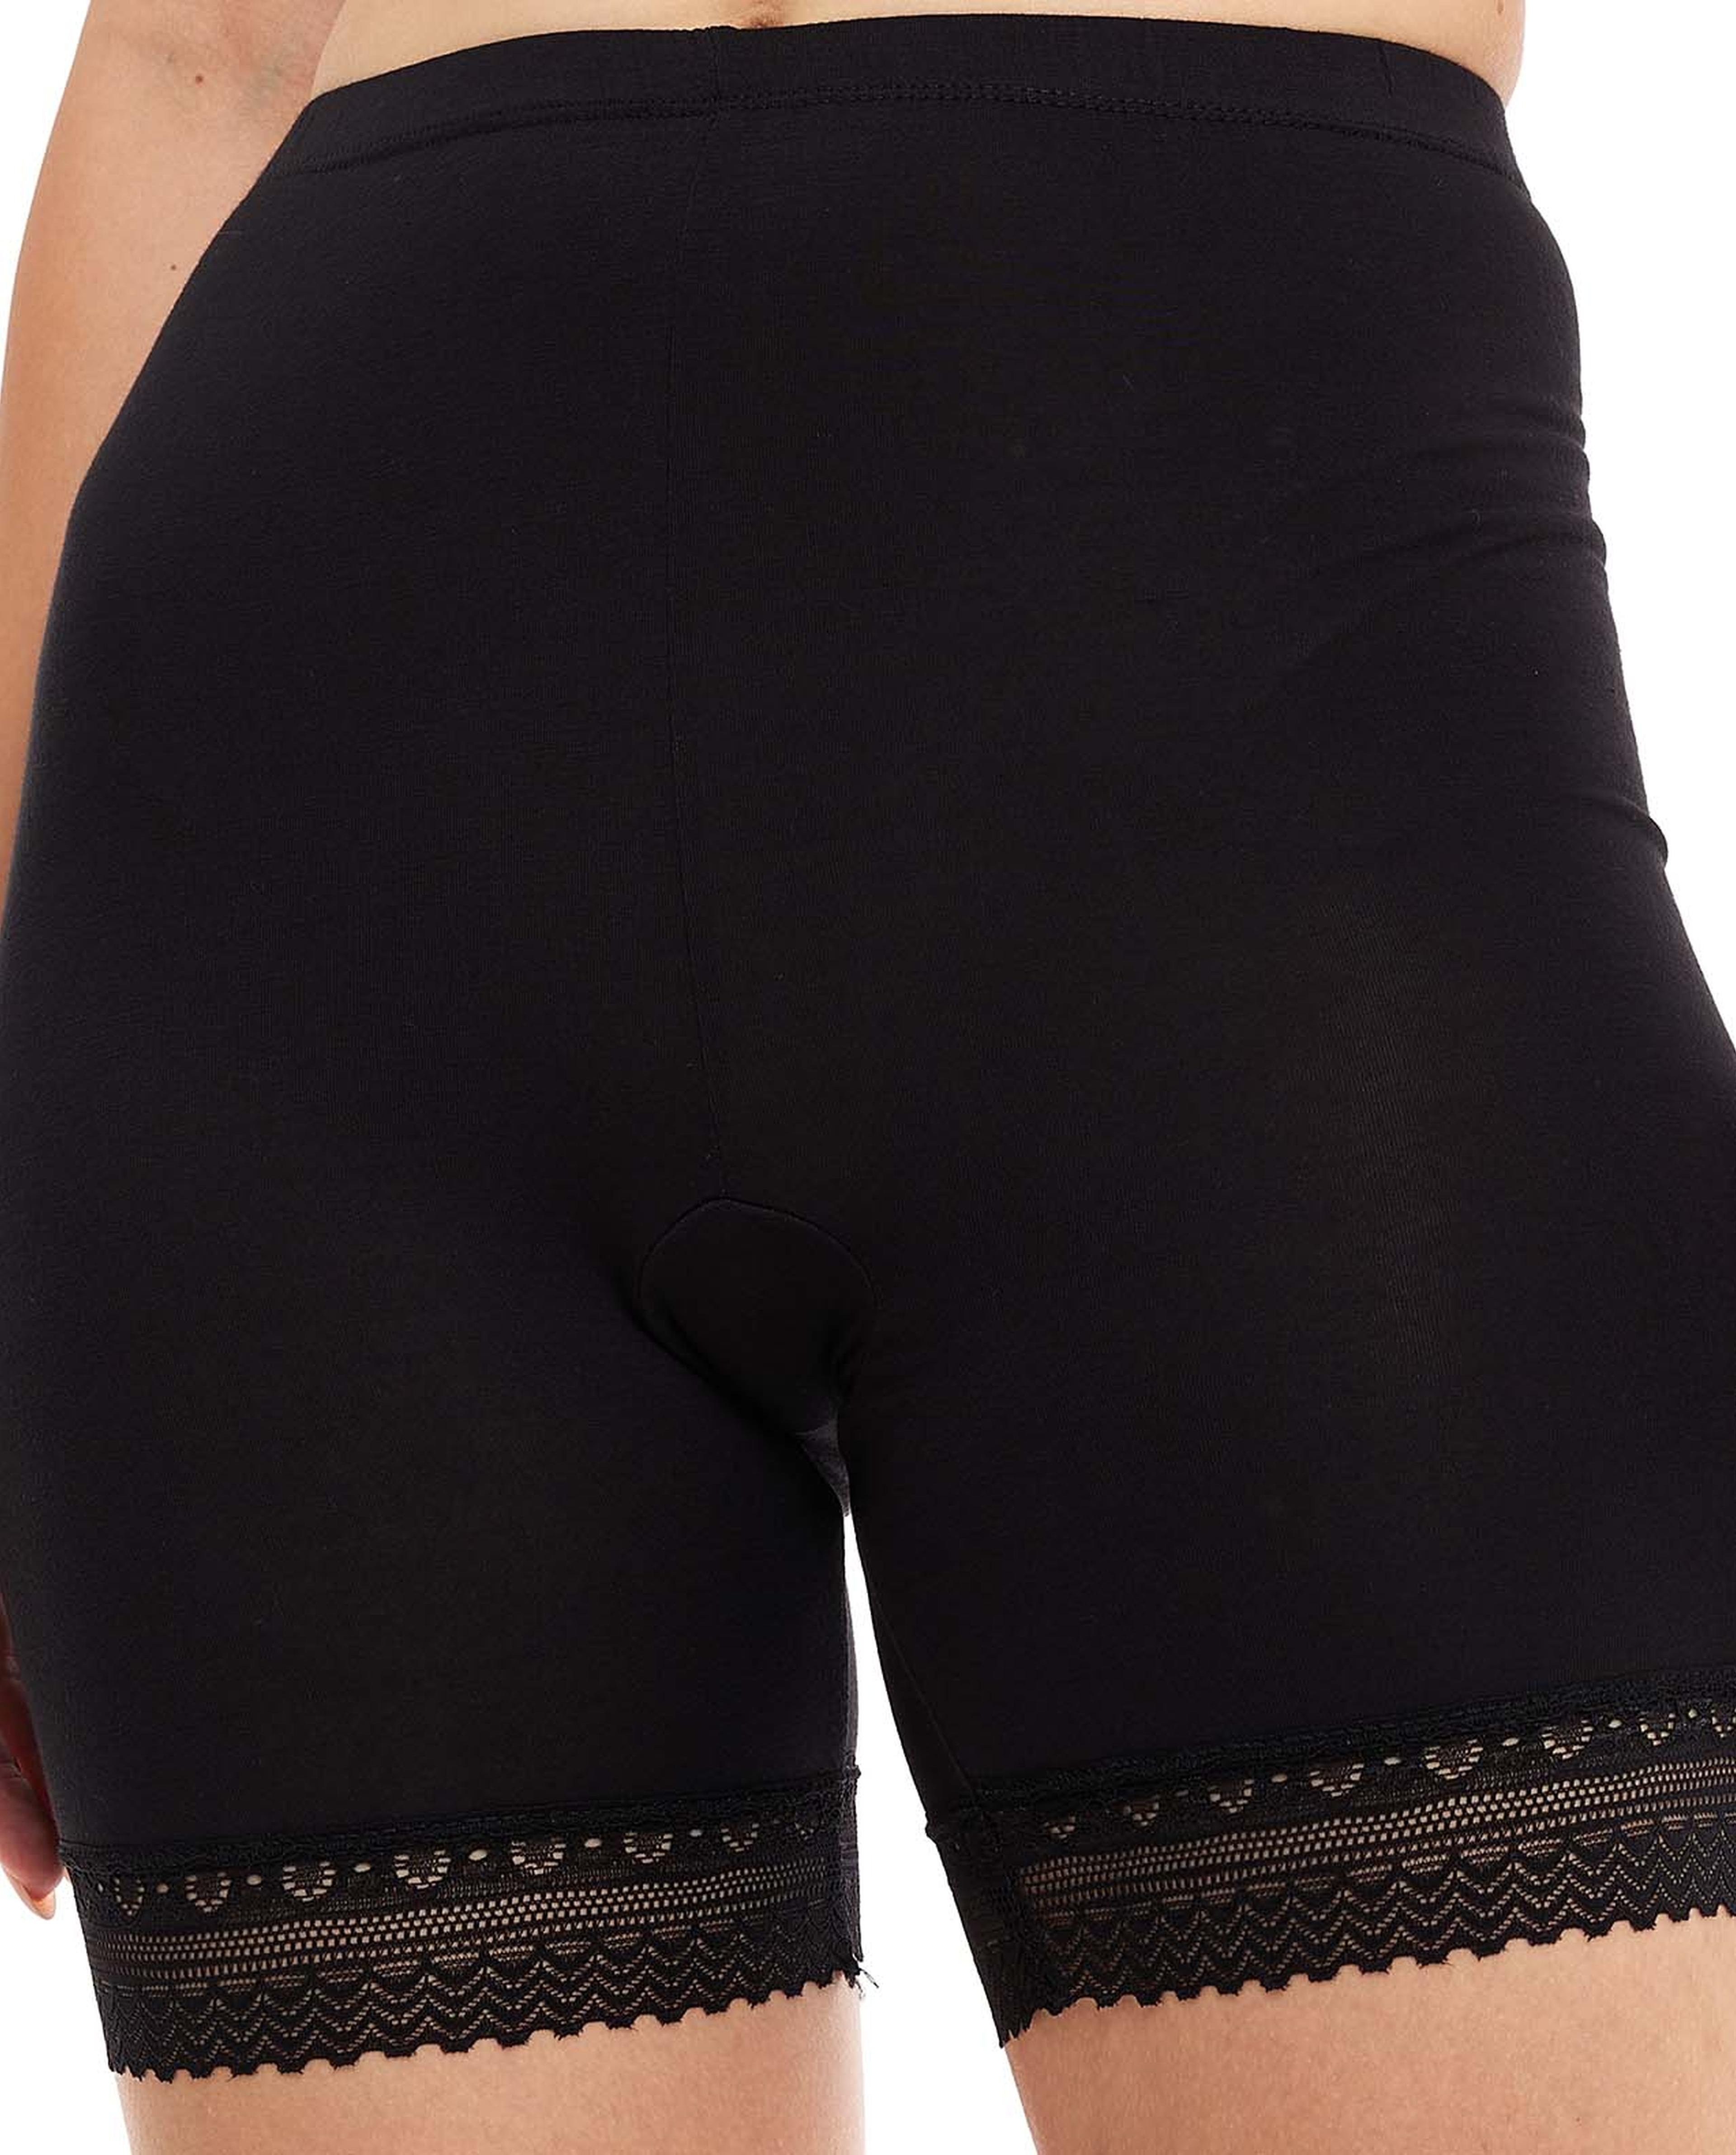 Lace Trim Inner Shorts